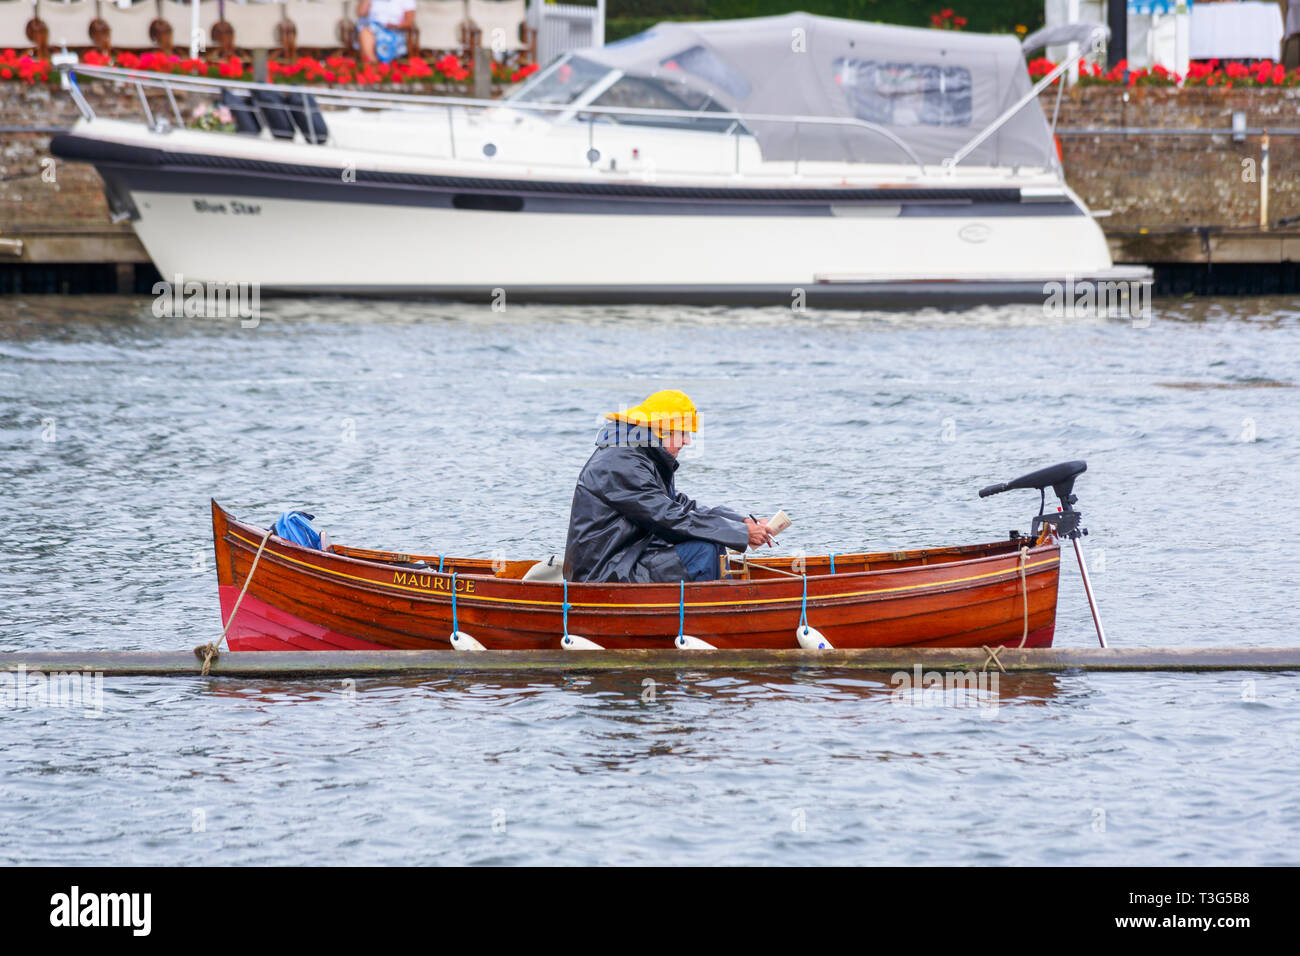 A steward wearing a raincoat and yellow sou'wester hat sits in a wooden rowing boat moored in the River Thames on a wet day at Henley Royal Regatta Stock Photo